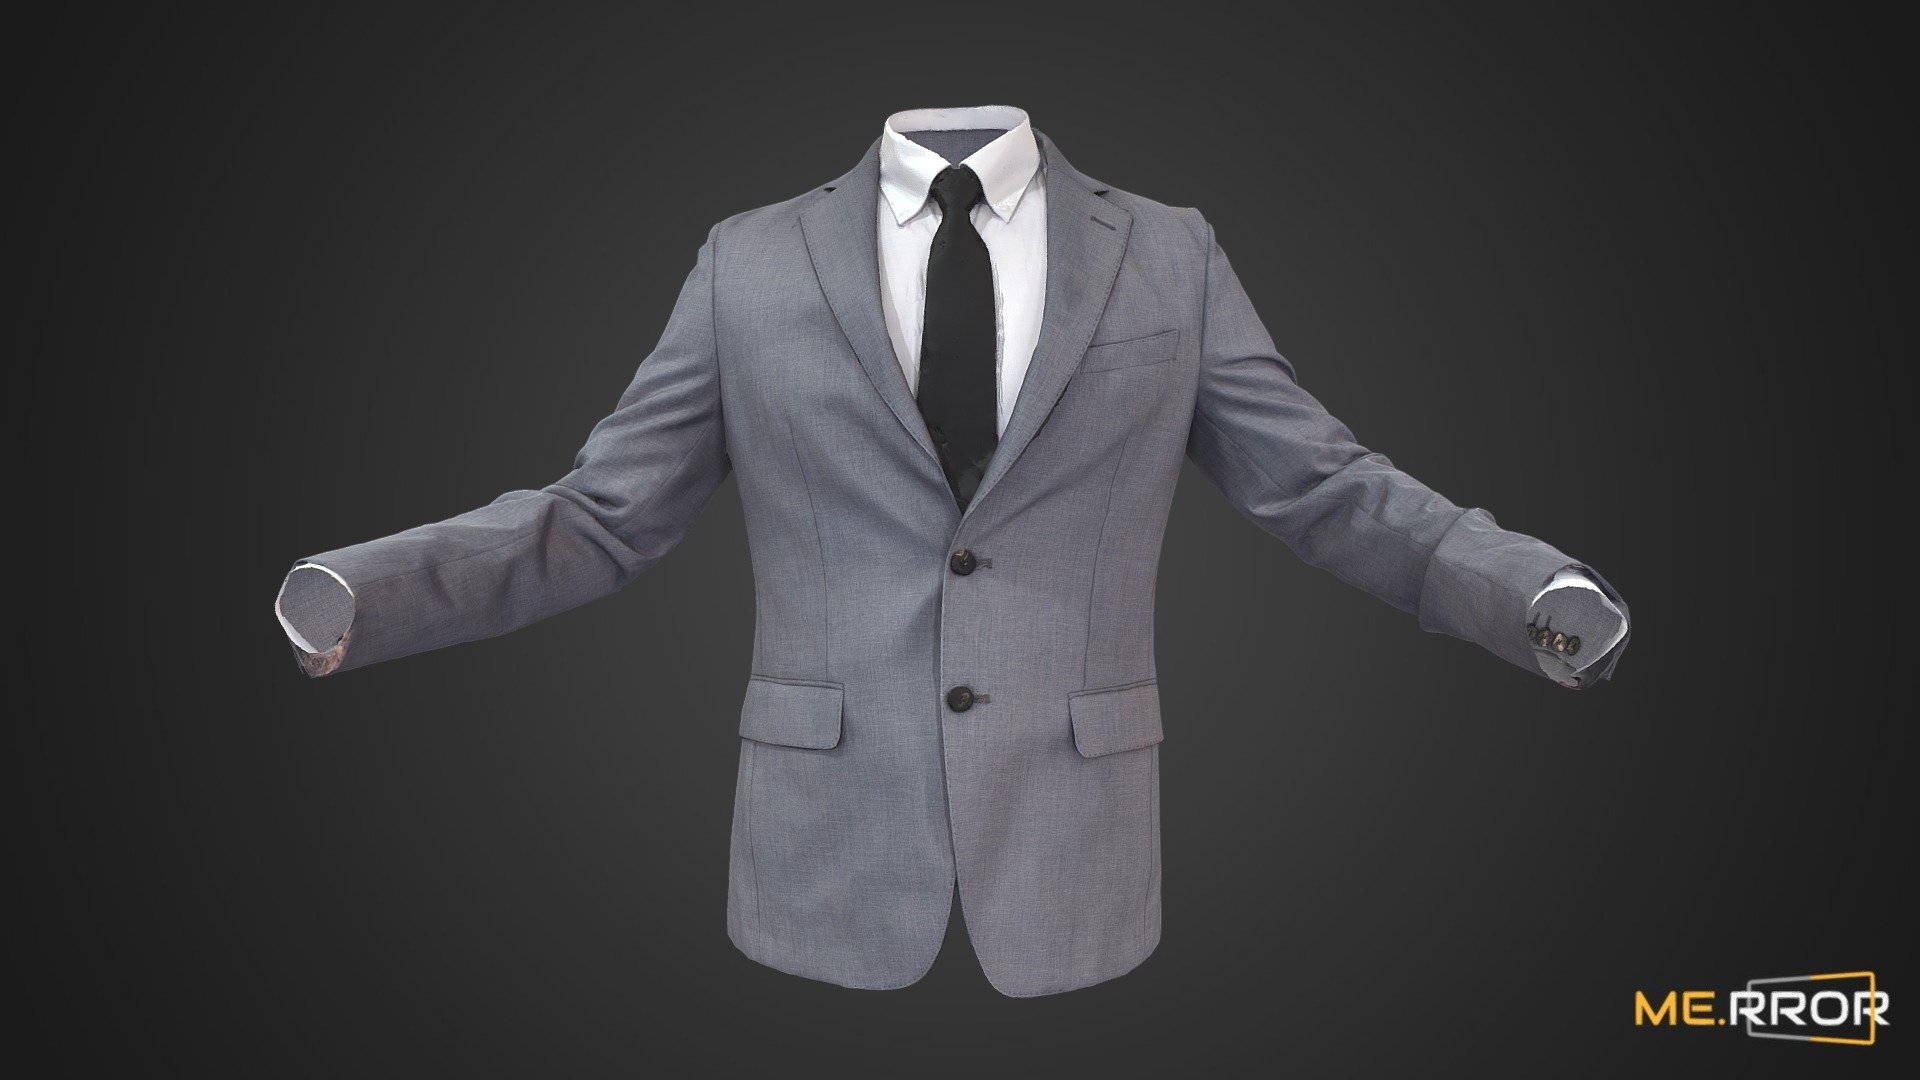 MERROR is a 3D Content PLATFORM which introduces various Asian assets to the 3D world


3DScanning #Photogrametry #ME.RROR - Gray Suit - Buy Royalty Free 3D model by ME.RROR (@merror) 3d model